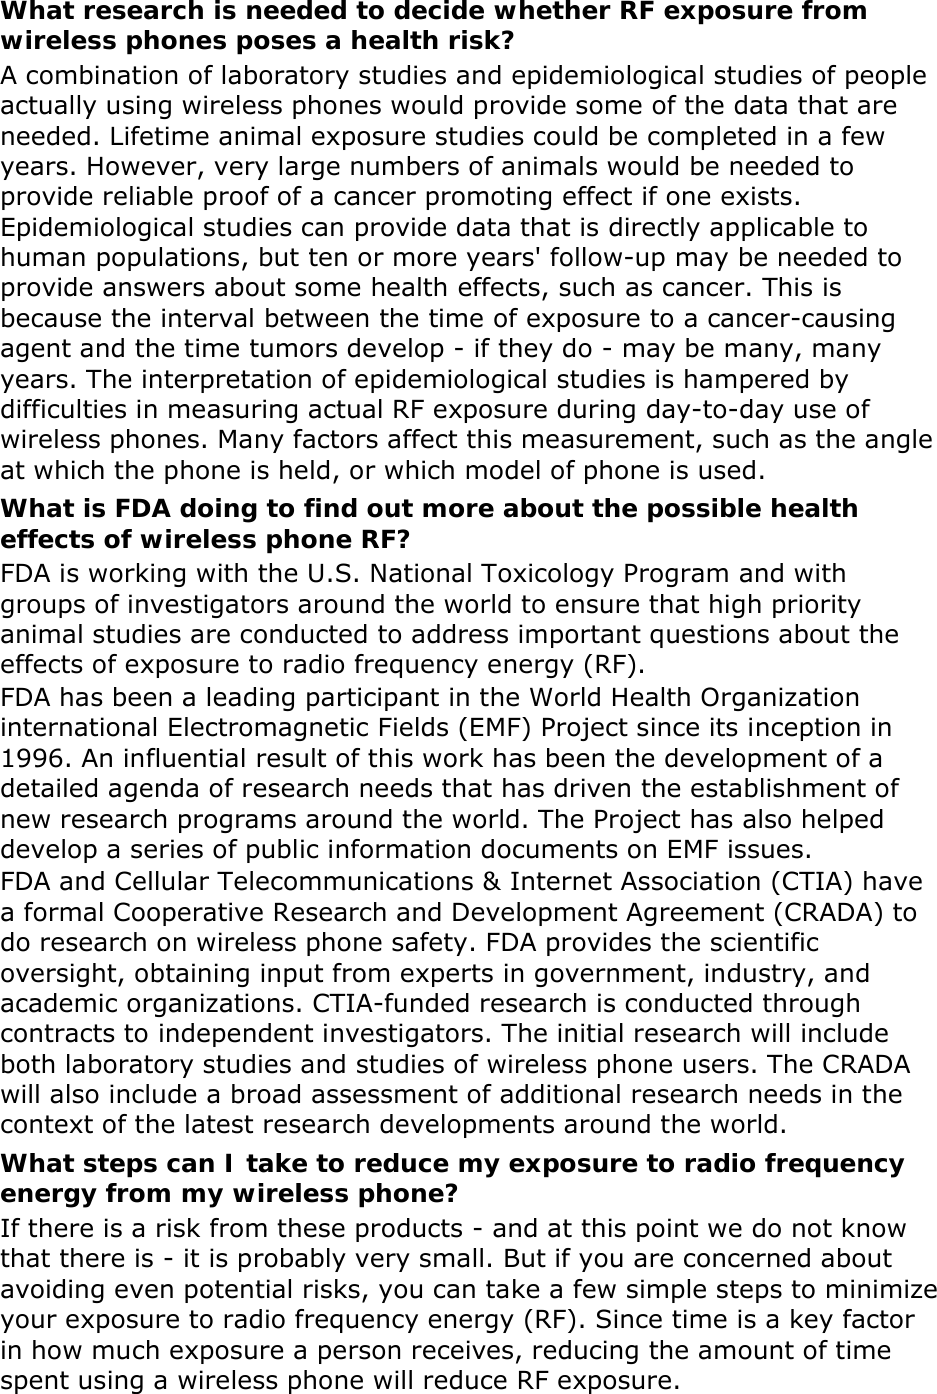 What research is needed to decide whether RF exposure from wireless phones poses a health risk? A combination of laboratory studies and epidemiological studies of people actually using wireless phones would provide some of the data that are needed. Lifetime animal exposure studies could be completed in a few years. However, very large numbers of animals would be needed to provide reliable proof of a cancer promoting effect if one exists. Epidemiological studies can provide data that is directly applicable to human populations, but ten or more years&apos; follow-up may be needed to provide answers about some health effects, such as cancer. This is because the interval between the time of exposure to a cancer-causing agent and the time tumors develop - if they do - may be many, many years. The interpretation of epidemiological studies is hampered by difficulties in measuring actual RF exposure during day-to-day use of wireless phones. Many factors affect this measurement, such as the angle at which the phone is held, or which model of phone is used. What is FDA doing to find out more about the possible health effects of wireless phone RF? FDA is working with the U.S. National Toxicology Program and with groups of investigators around the world to ensure that high priority animal studies are conducted to address important questions about the effects of exposure to radio frequency energy (RF). FDA has been a leading participant in the World Health Organization international Electromagnetic Fields (EMF) Project since its inception in 1996. An influential result of this work has been the development of a detailed agenda of research needs that has driven the establishment of new research programs around the world. The Project has also helped develop a series of public information documents on EMF issues. FDA and Cellular Telecommunications &amp; Internet Association (CTIA) have a formal Cooperative Research and Development Agreement (CRADA) to do research on wireless phone safety. FDA provides the scientific oversight, obtaining input from experts in government, industry, and academic organizations. CTIA-funded research is conducted through contracts to independent investigators. The initial research will include both laboratory studies and studies of wireless phone users. The CRADA will also include a broad assessment of additional research needs in the context of the latest research developments around the world. What steps can I take to reduce my exposure to radio frequency energy from my wireless phone? If there is a risk from these products - and at this point we do not know that there is - it is probably very small. But if you are concerned about avoiding even potential risks, you can take a few simple steps to minimize your exposure to radio frequency energy (RF). Since time is a key factor in how much exposure a person receives, reducing the amount of time spent using a wireless phone will reduce RF exposure. 